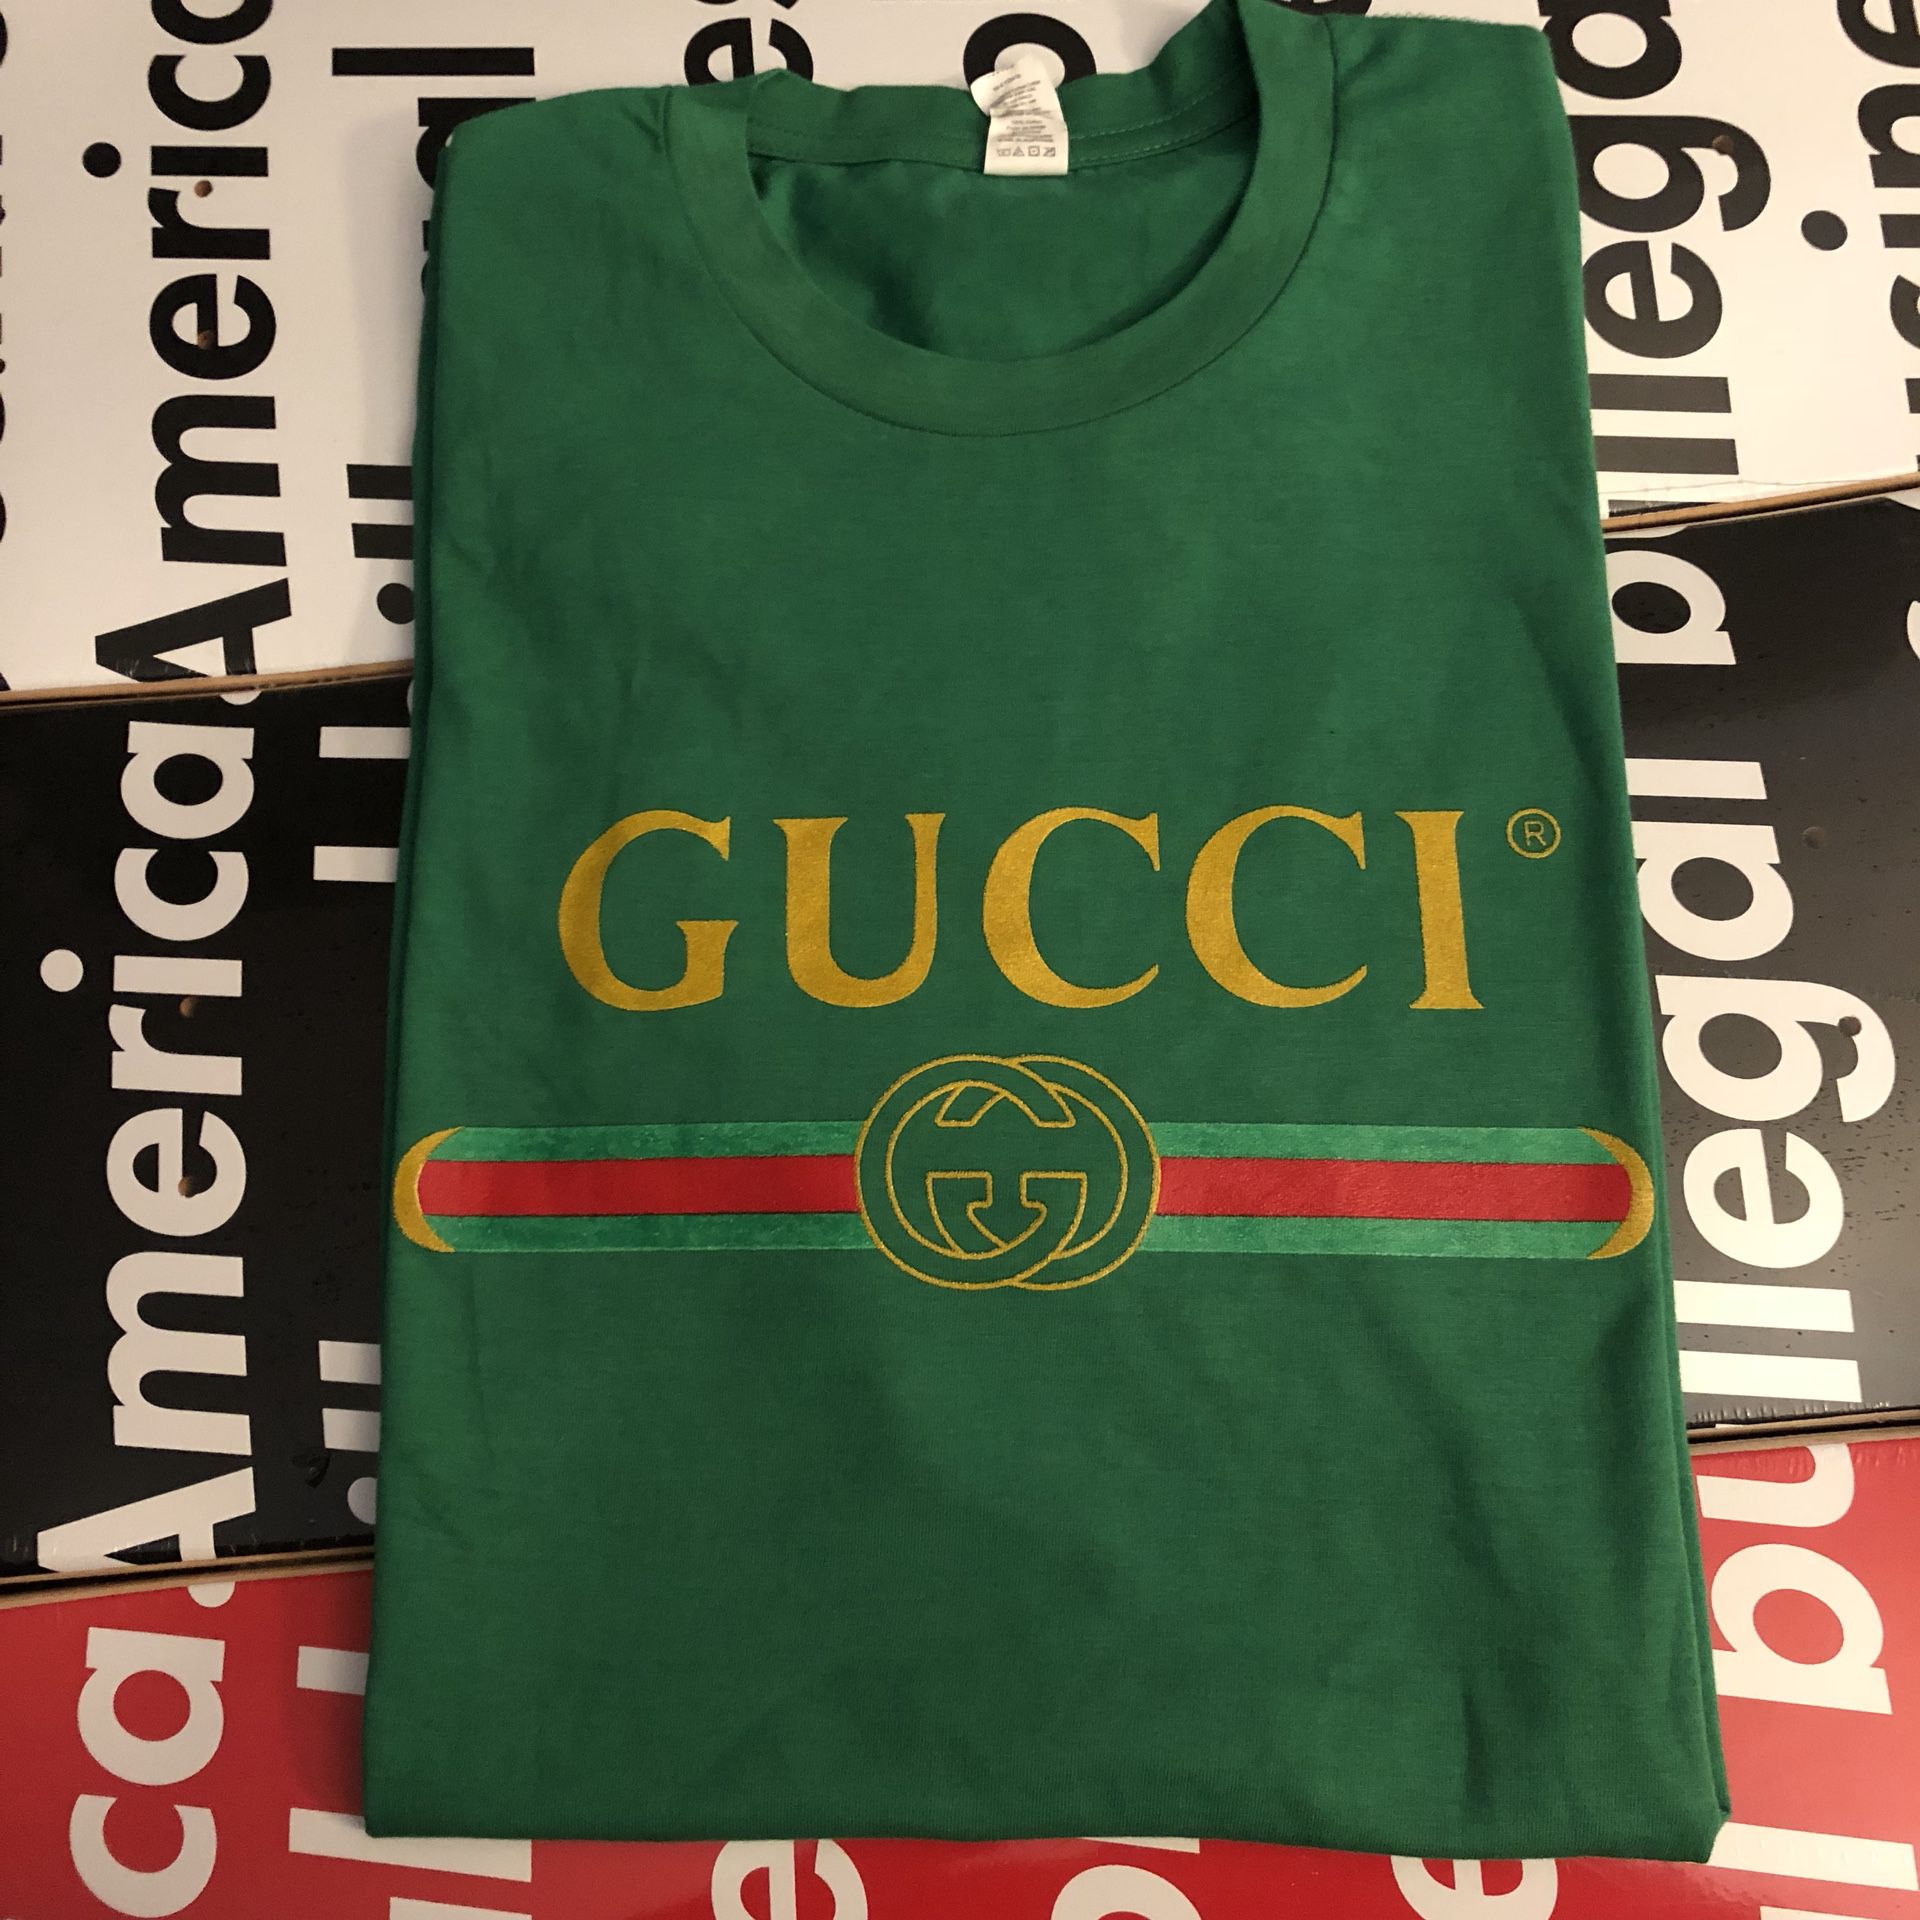 Vintage Gucci t shirt size large new color green for Sale in El Monte, CA -  OfferUp